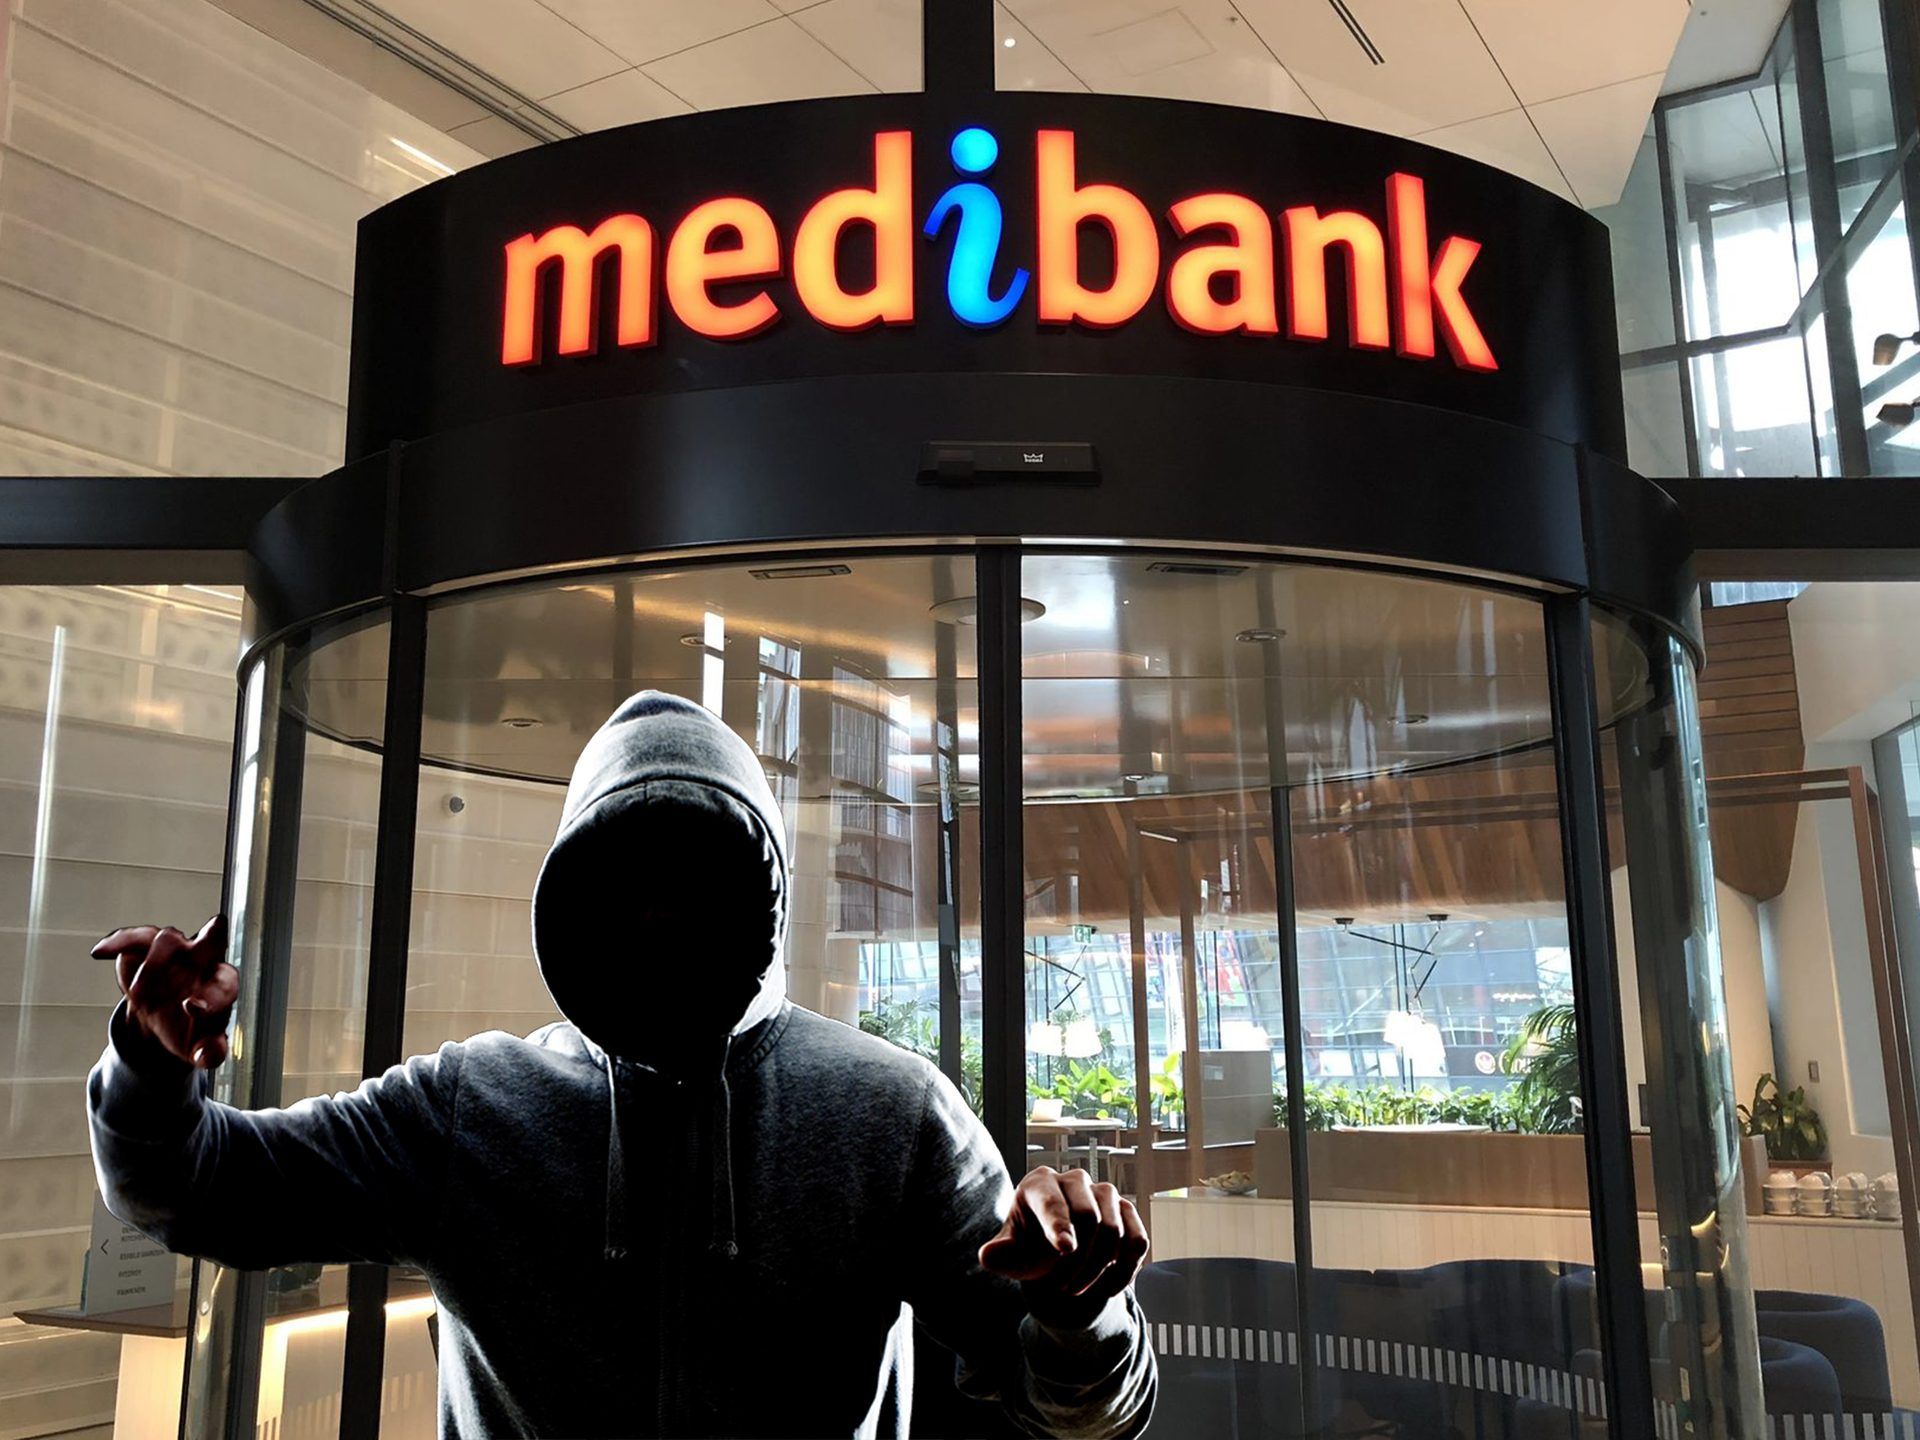 Medibank class action explained: Remember the Medibank data breach, join Medibank data breach class action, and get Medibank compensation of up to $20,000.